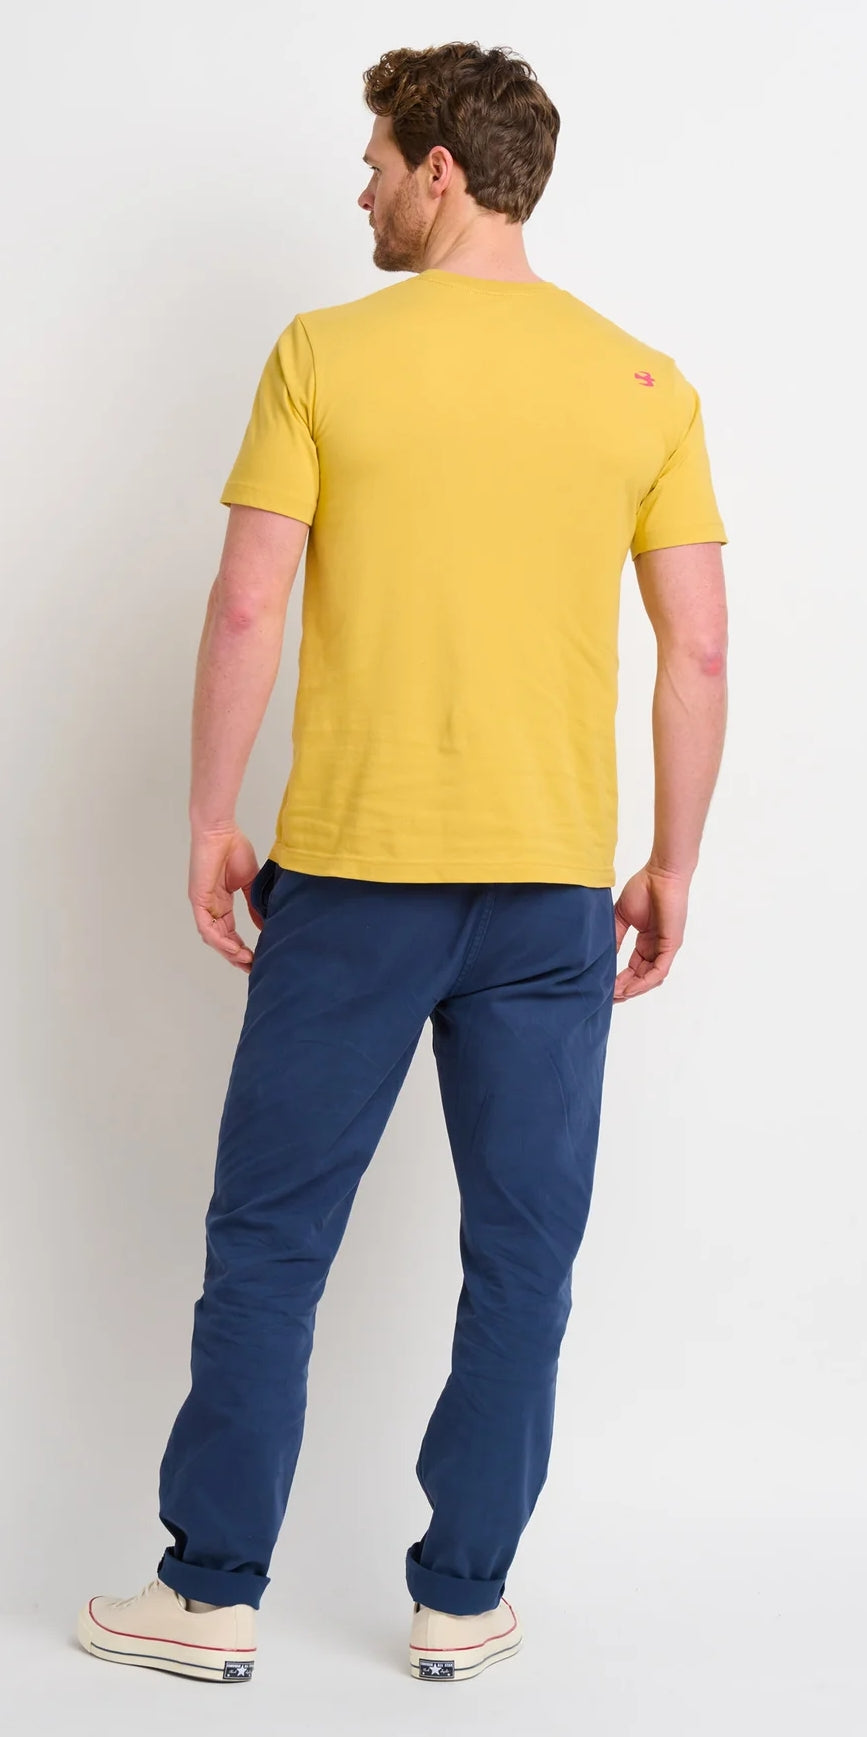 Brakeburn men's yellow t-shirt featuring a print of a bear on a bicycle carrying a surfboard